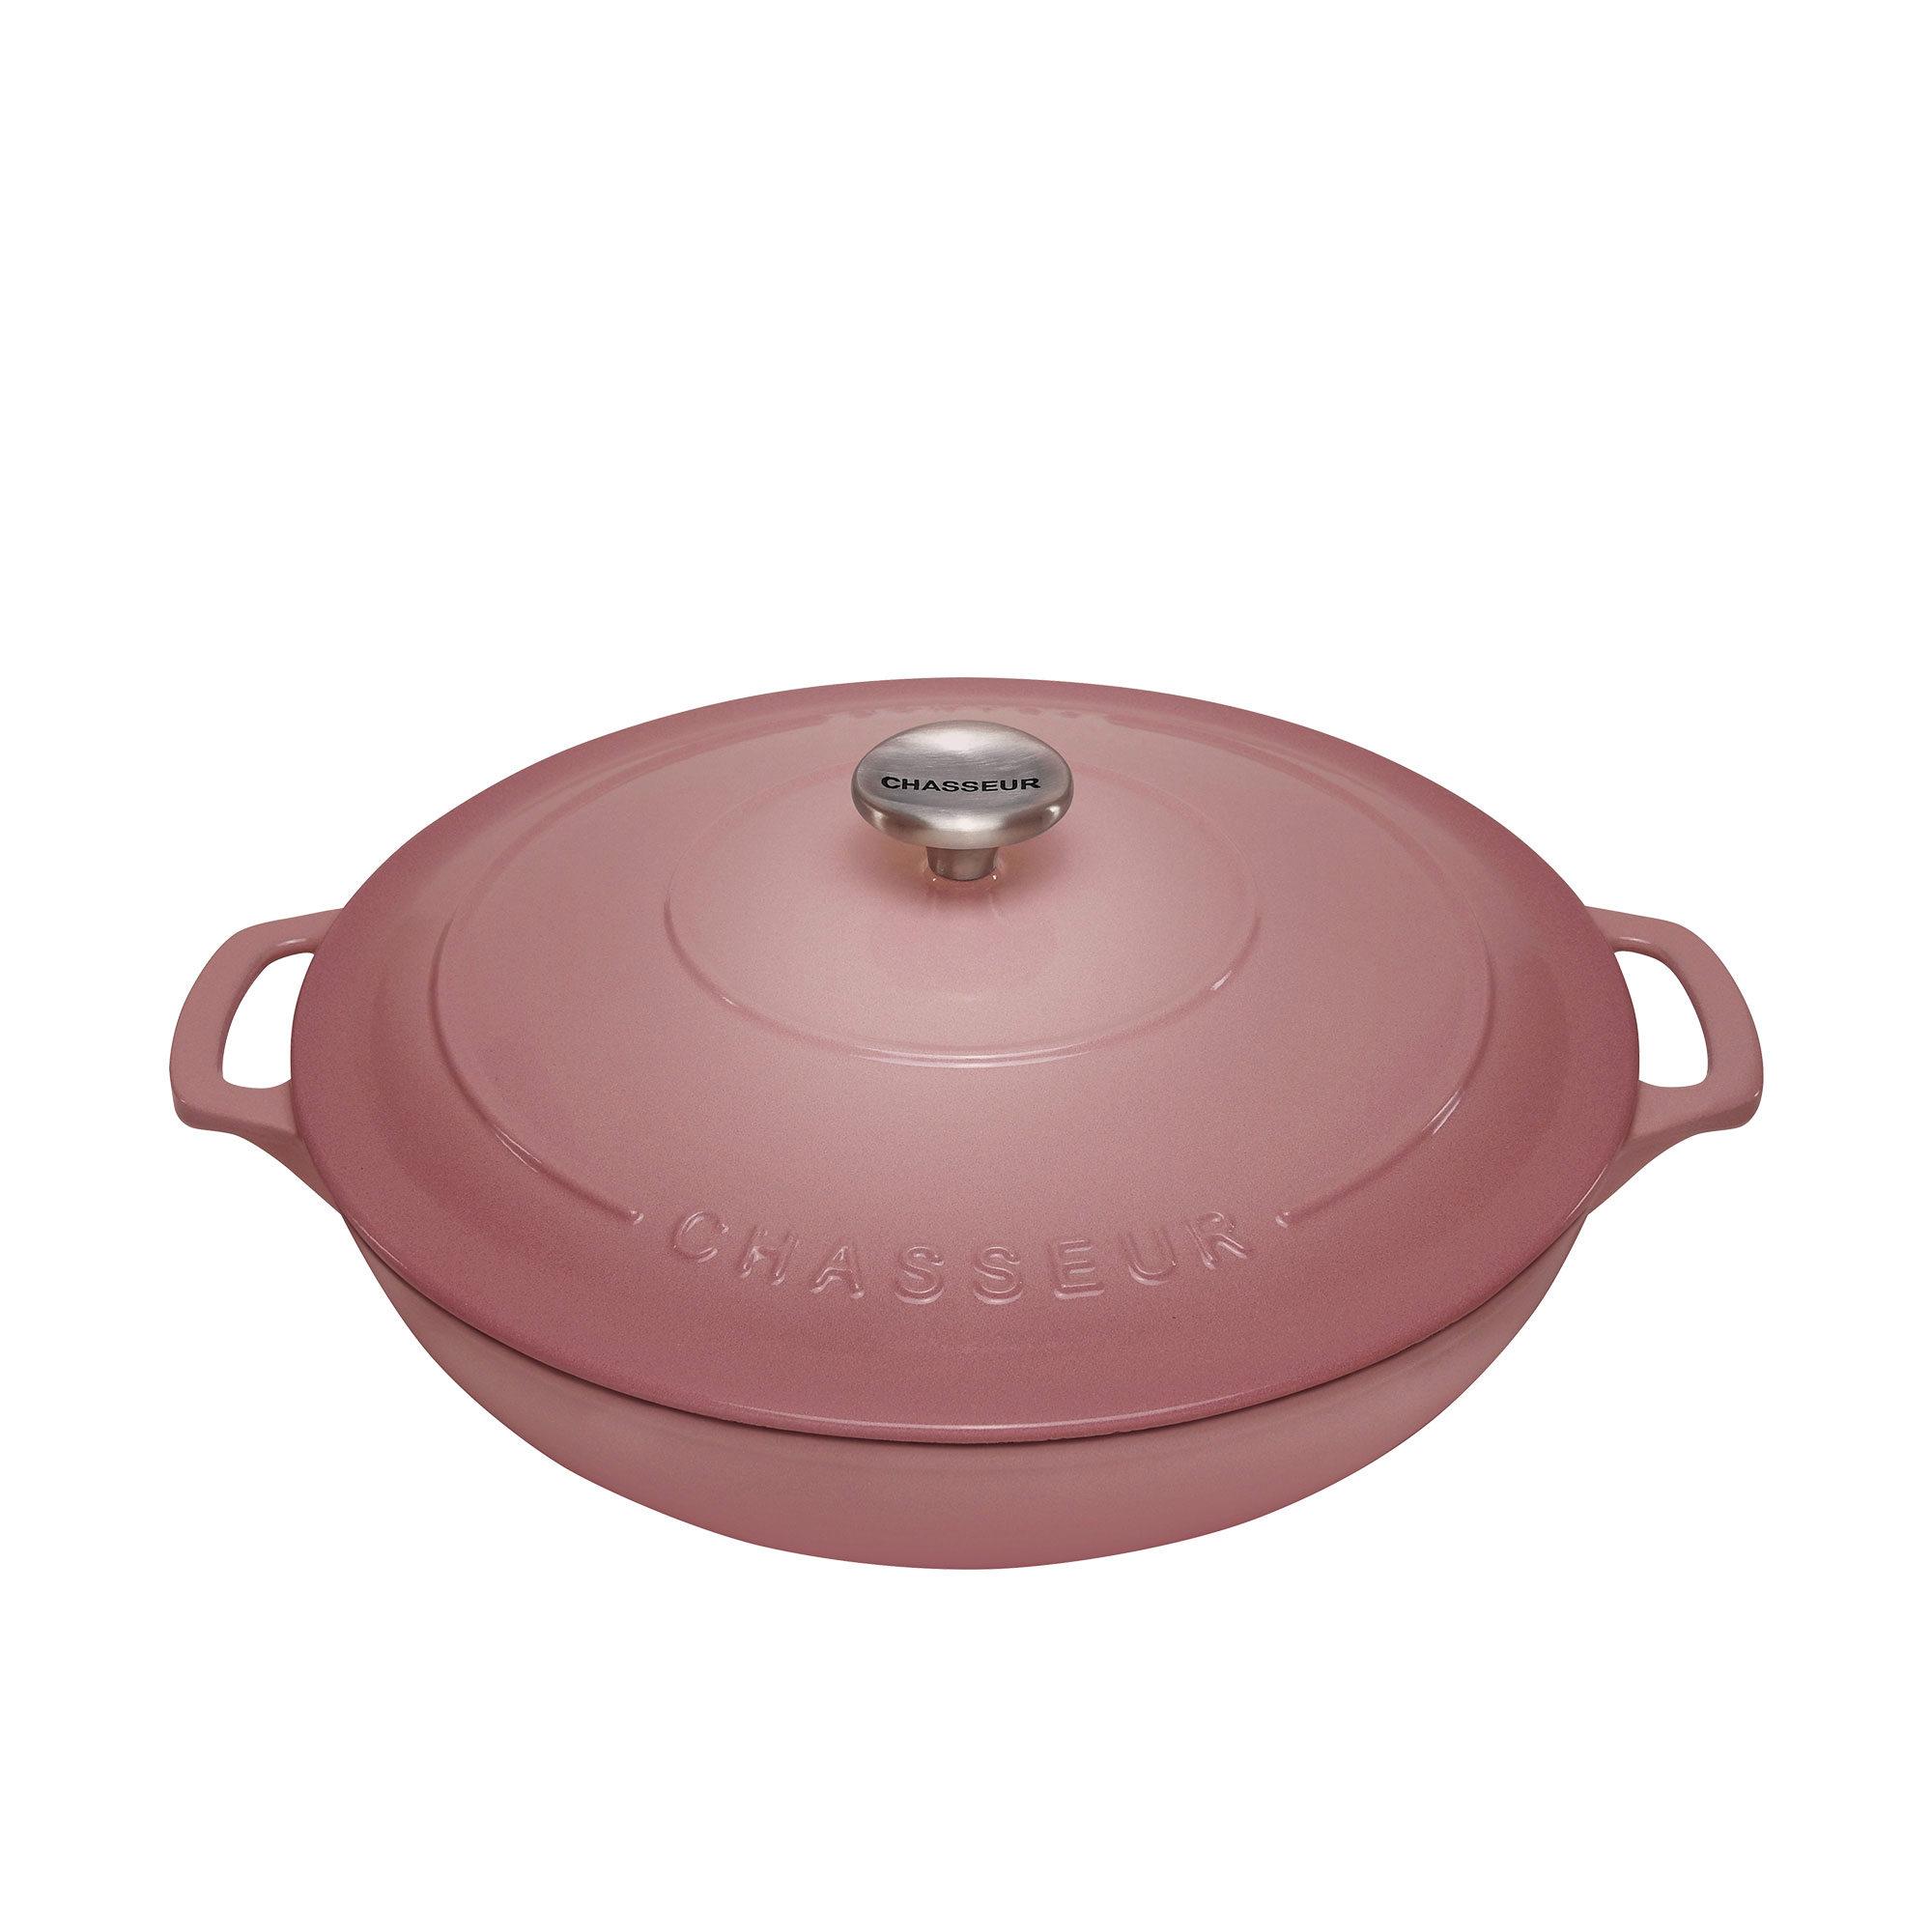 Chasseur Round Casserole 30cm - 2.5L Rosewood Image 1